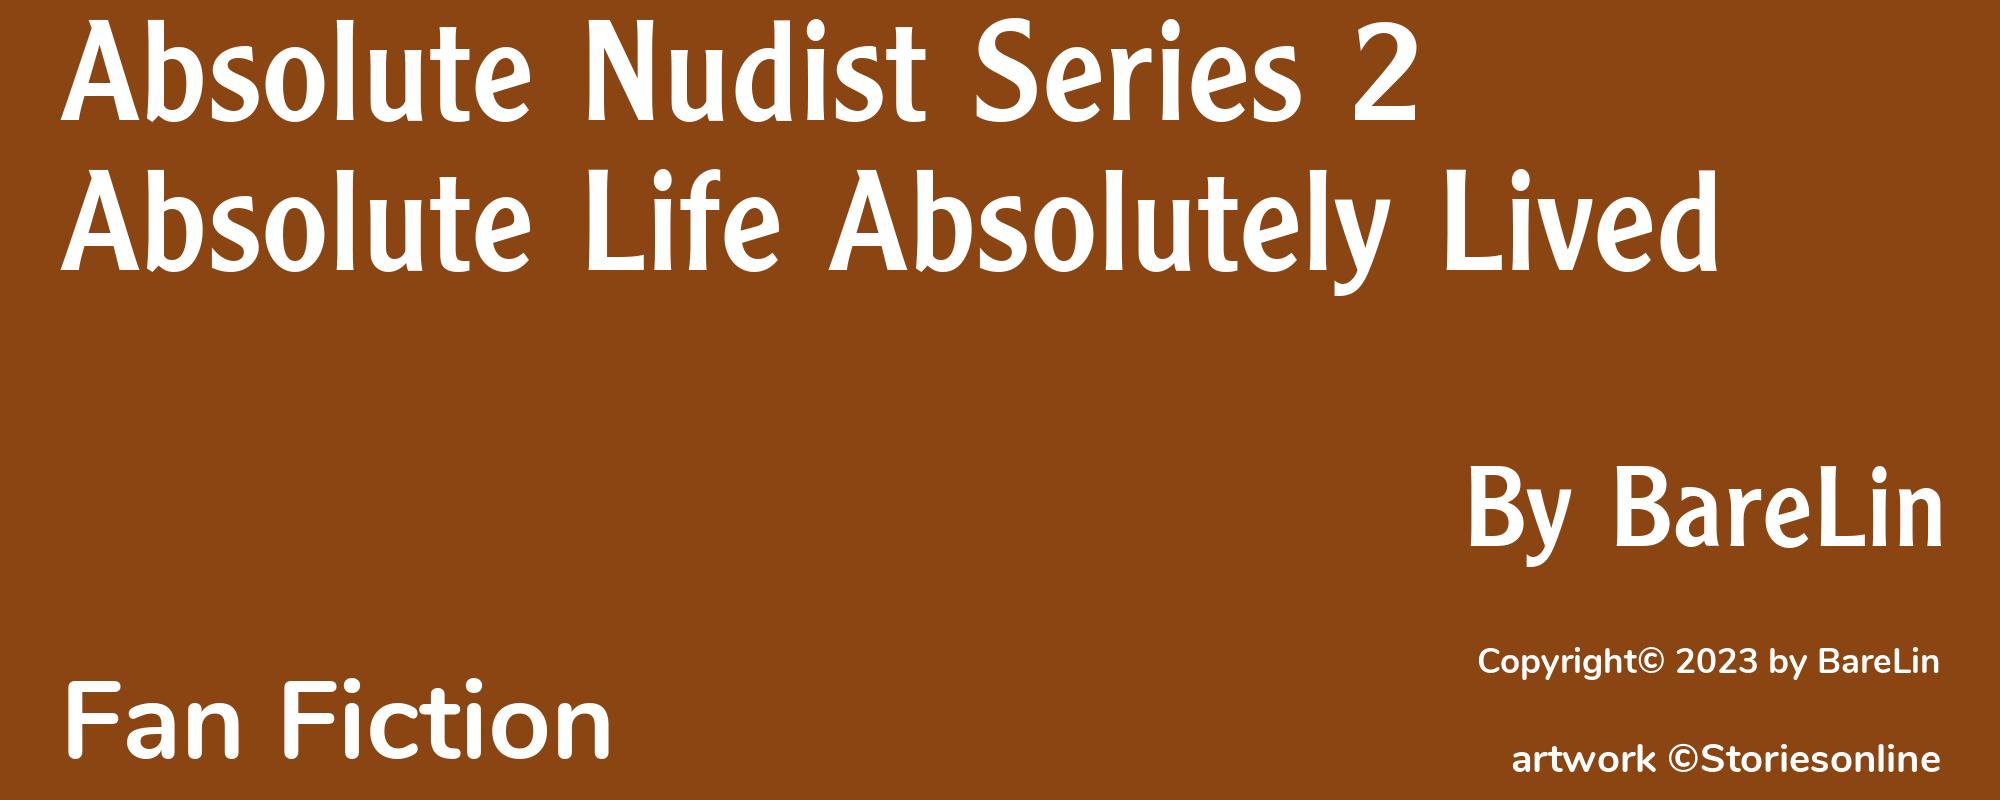 Absolute Nudist Series 2 Absolute Life Absolutely Lived - Cover